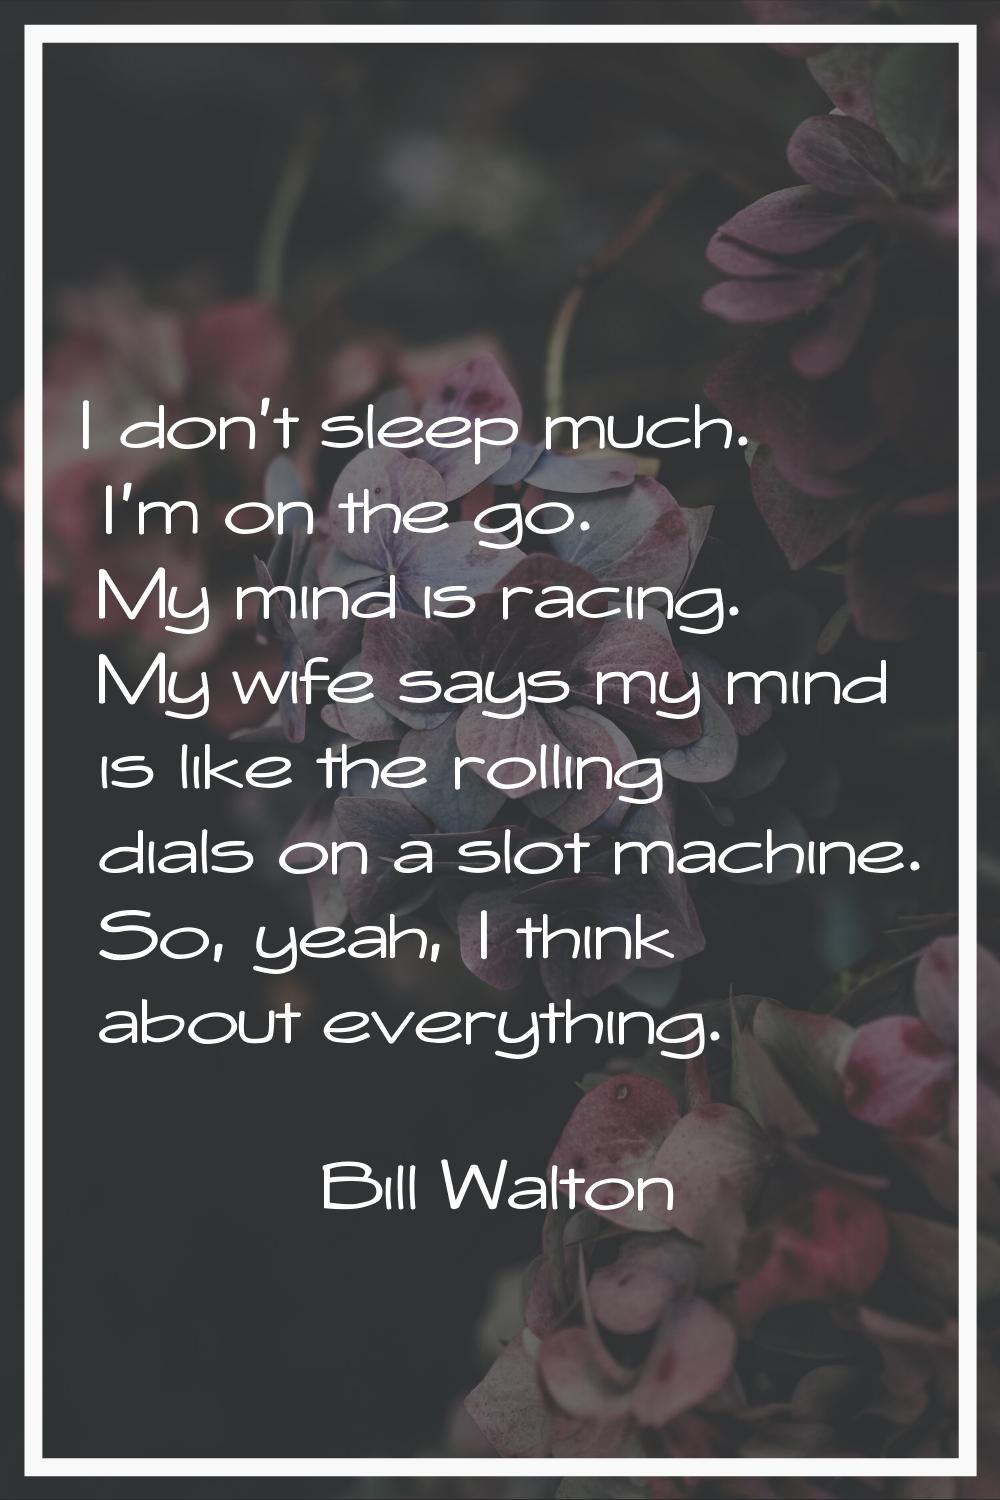 I don't sleep much. I'm on the go. My mind is racing. My wife says my mind is like the rolling dial